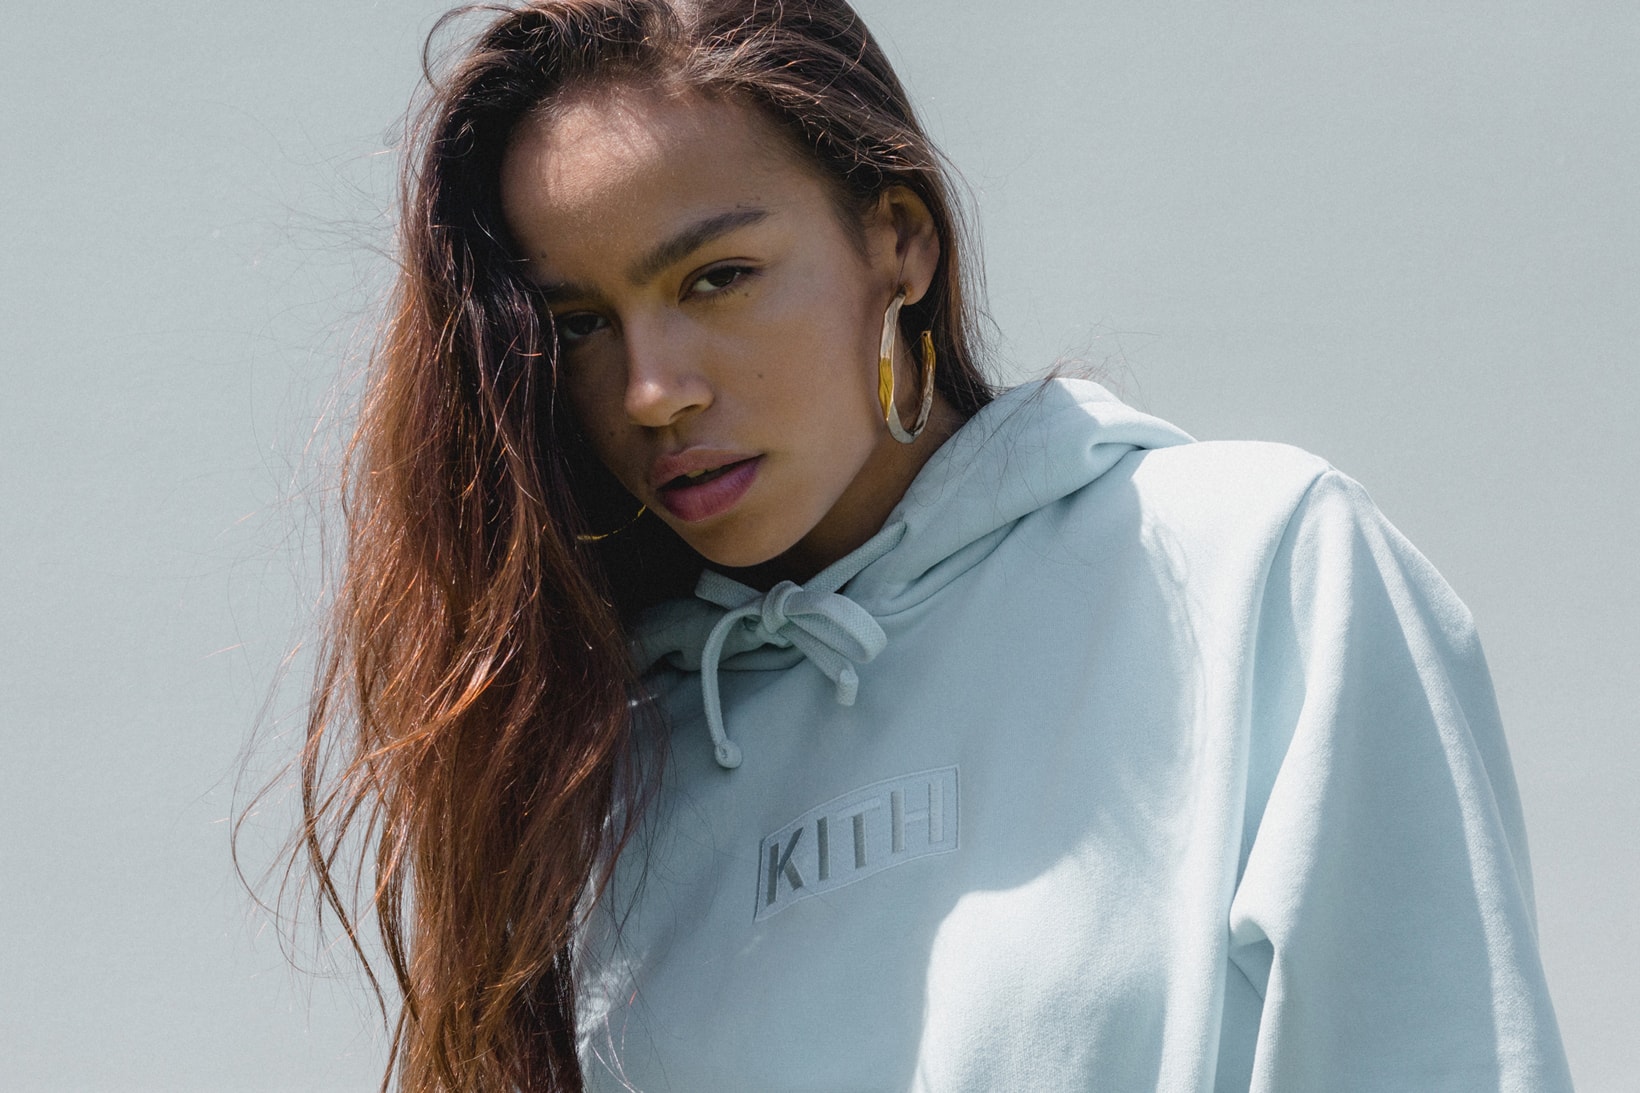 Kith Women Spring 2018 Classics Collection Baxter Hoodie Baby Blue